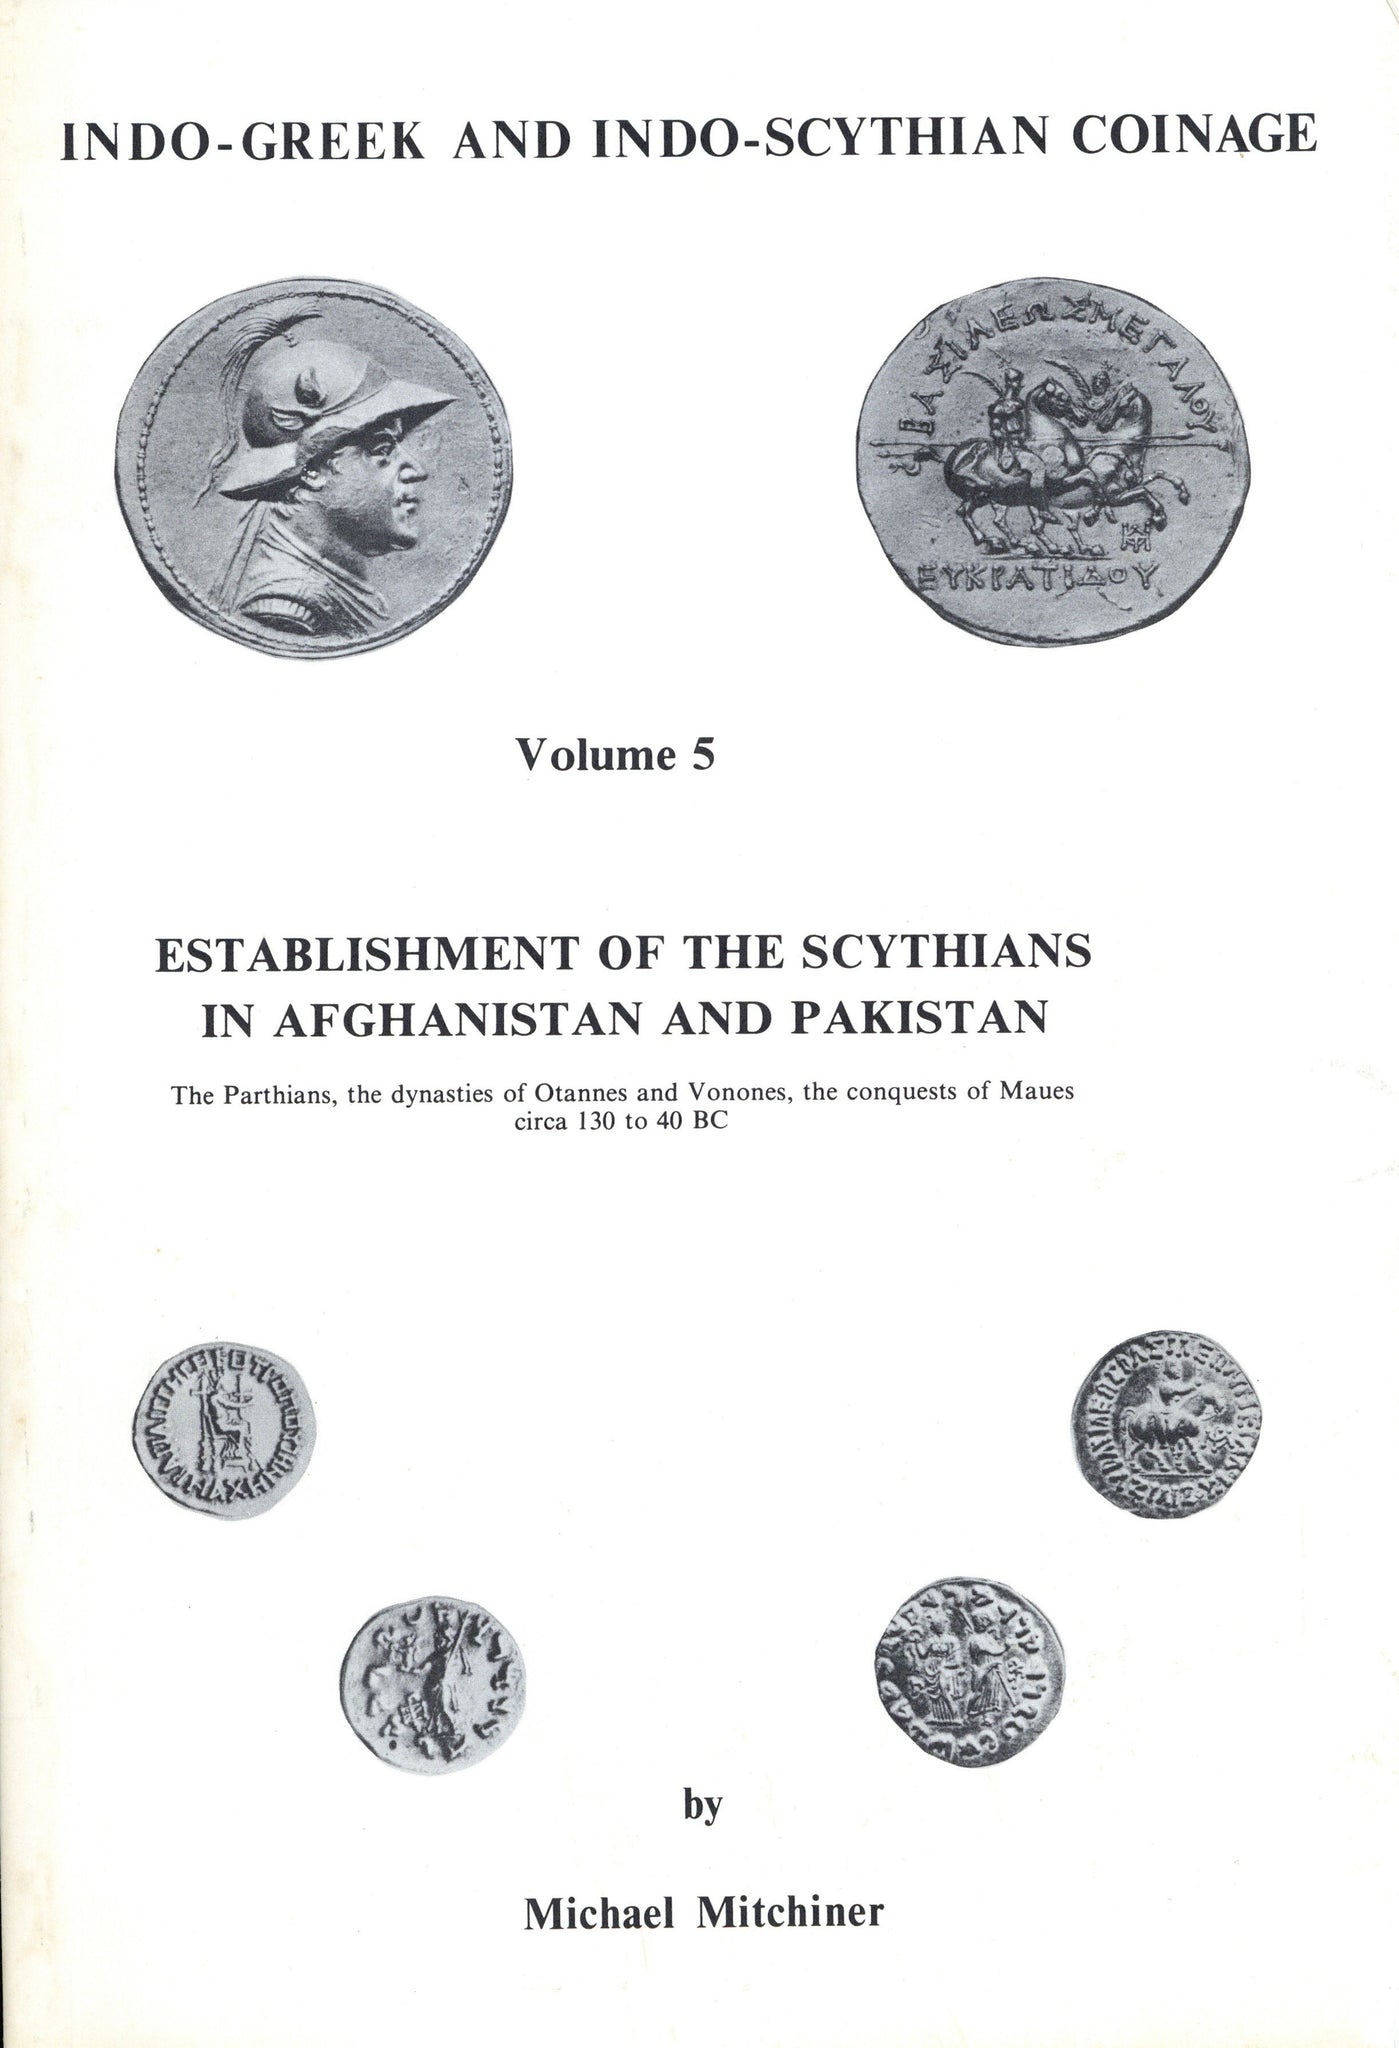 Indo-Greek and Indo-Scythian Coinage, volume 5: Establishment of the Scythians in Afghanistan and Pakistan by Michael Mitchiner